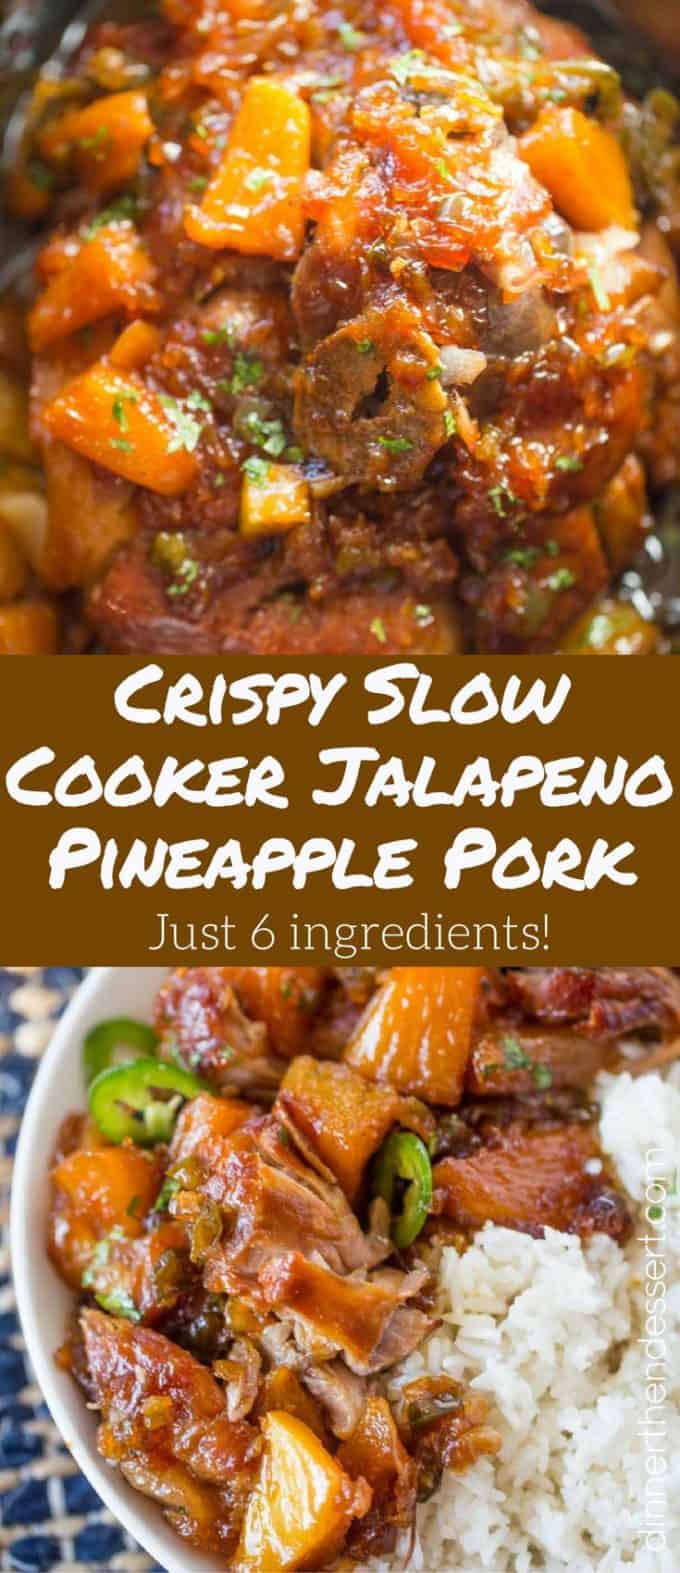 Slow Cooker Jalapeno Pineapple Pork with just six ingredients is crispy with a sweet, sticky, spicy glaze and meltingly soft pineapple chunks.